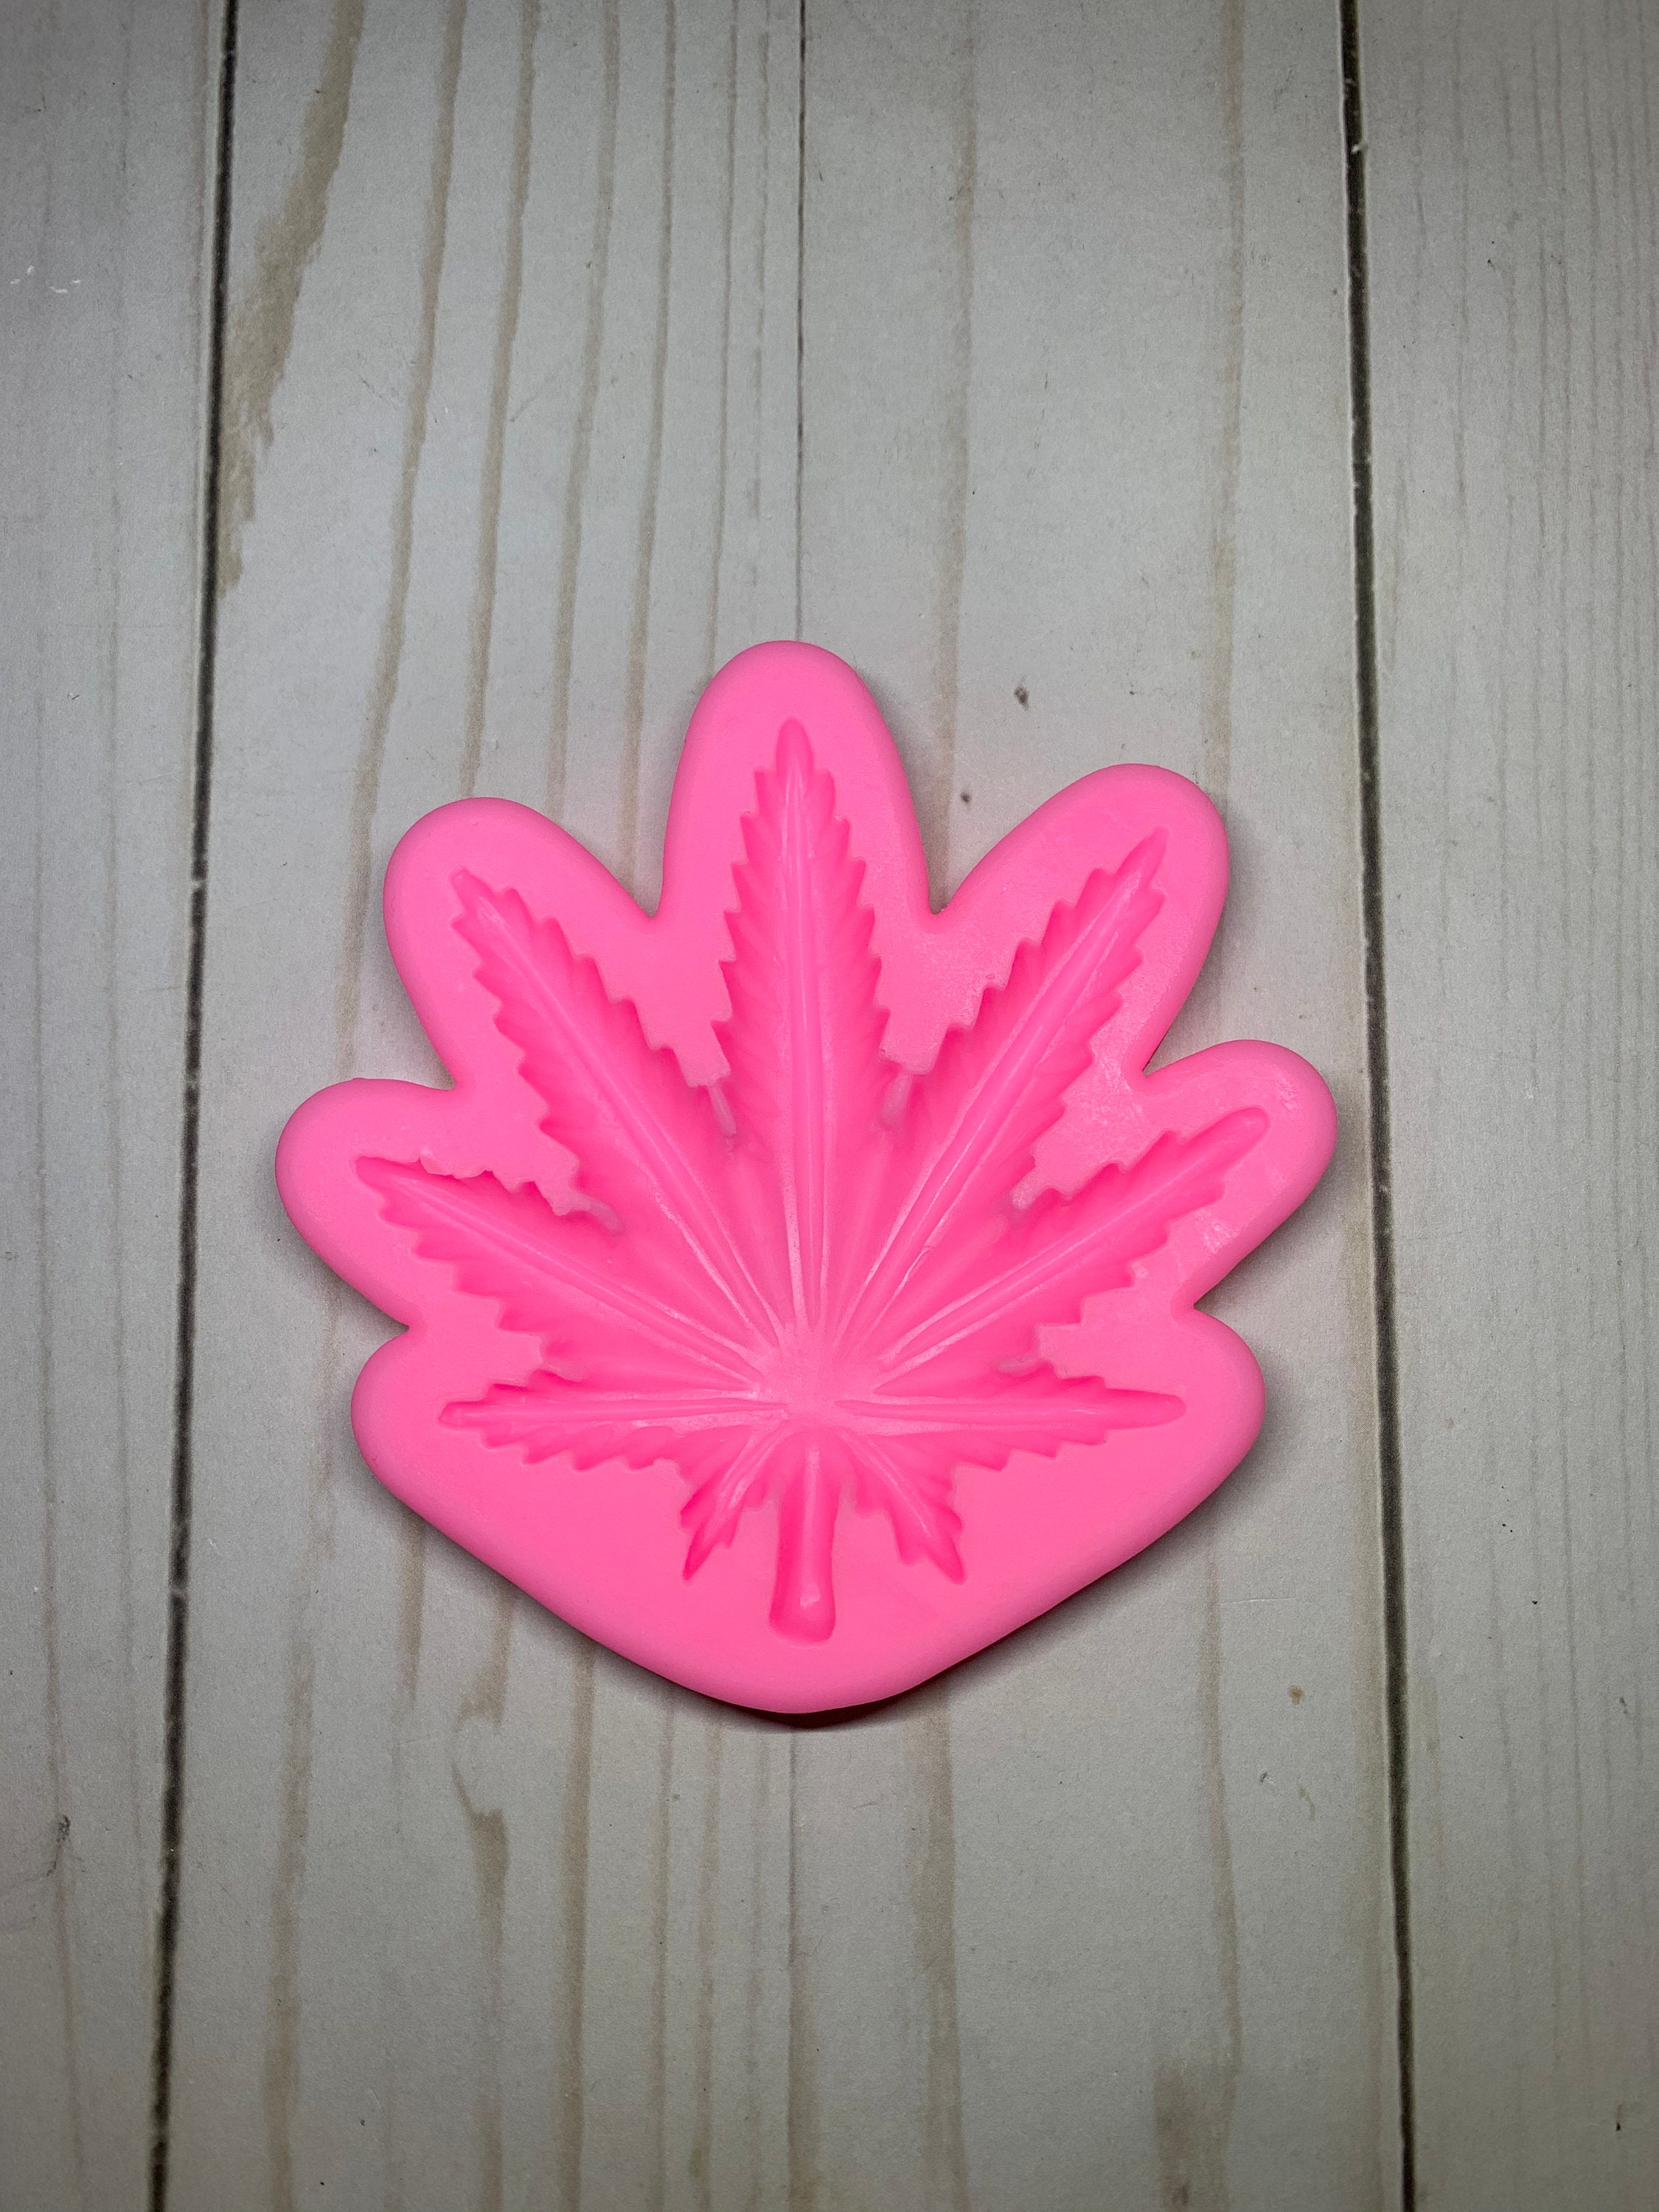 Marijuana Leaf Silicone Molds For Pot Candy Mold Chocolate 2 Pack